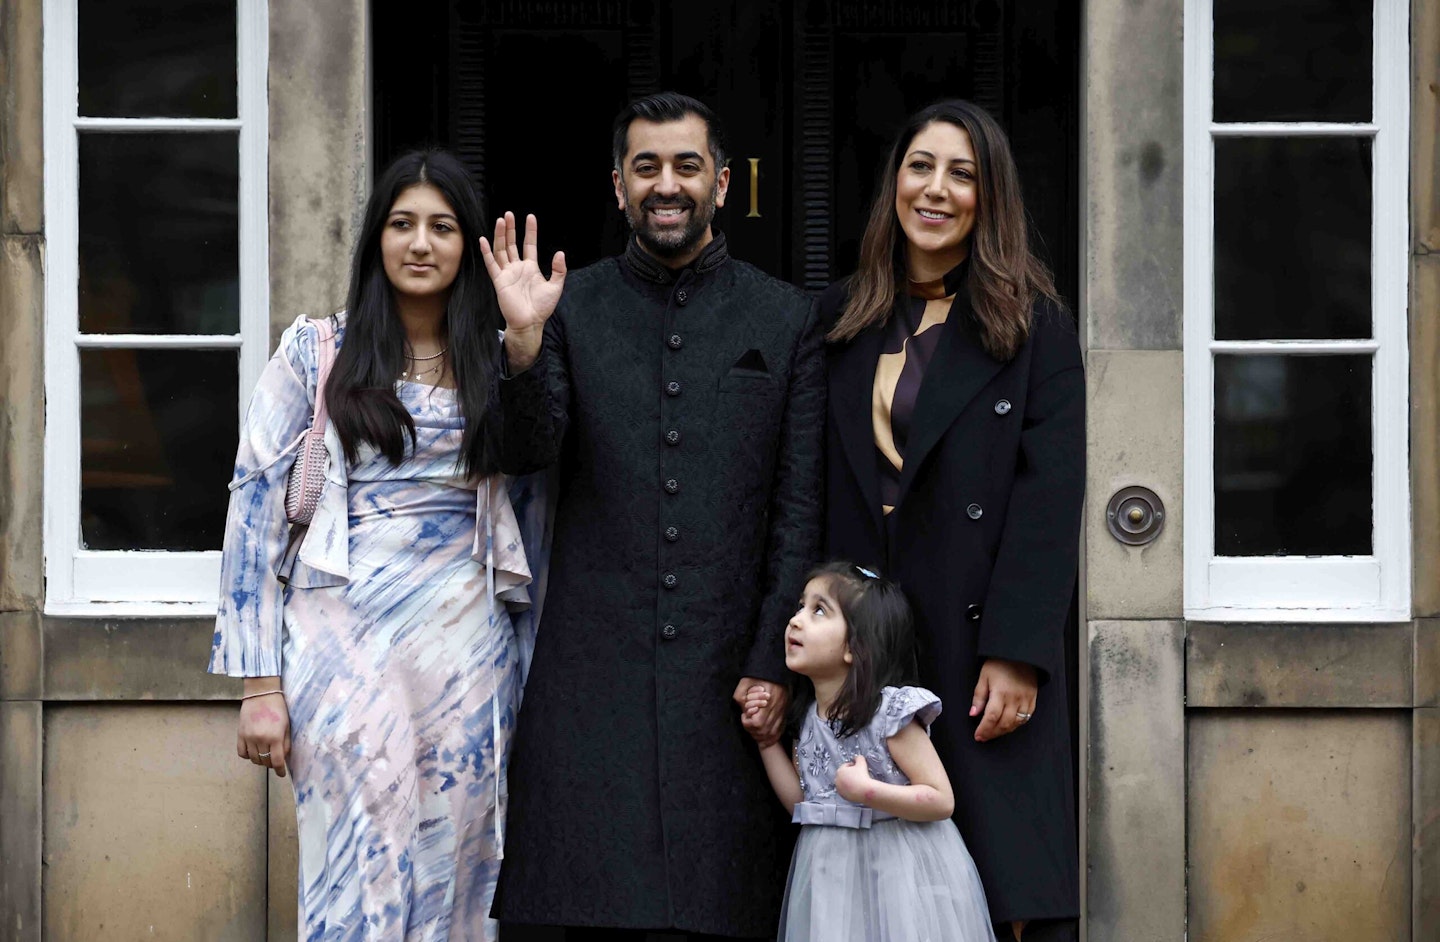 EDINBURGH, SCOTLAND - MARCH 29: New Scottish First Minister Humza Yousaf, poses alongside his wife, Nadia El-Nakla (R), his step daughter, Maya (L) and daughter, Amal (2nd R) at Bute House on March 29, 2023 in Edinburgh, Scotland. Humza Yousaf was elected Leader of the SNP this week with 52% of the membership vote. He will be sworn in as Scotland's First Minister at the Court of Sessions this morning. (Photo by Jeff J Mitchell/Getty Images)